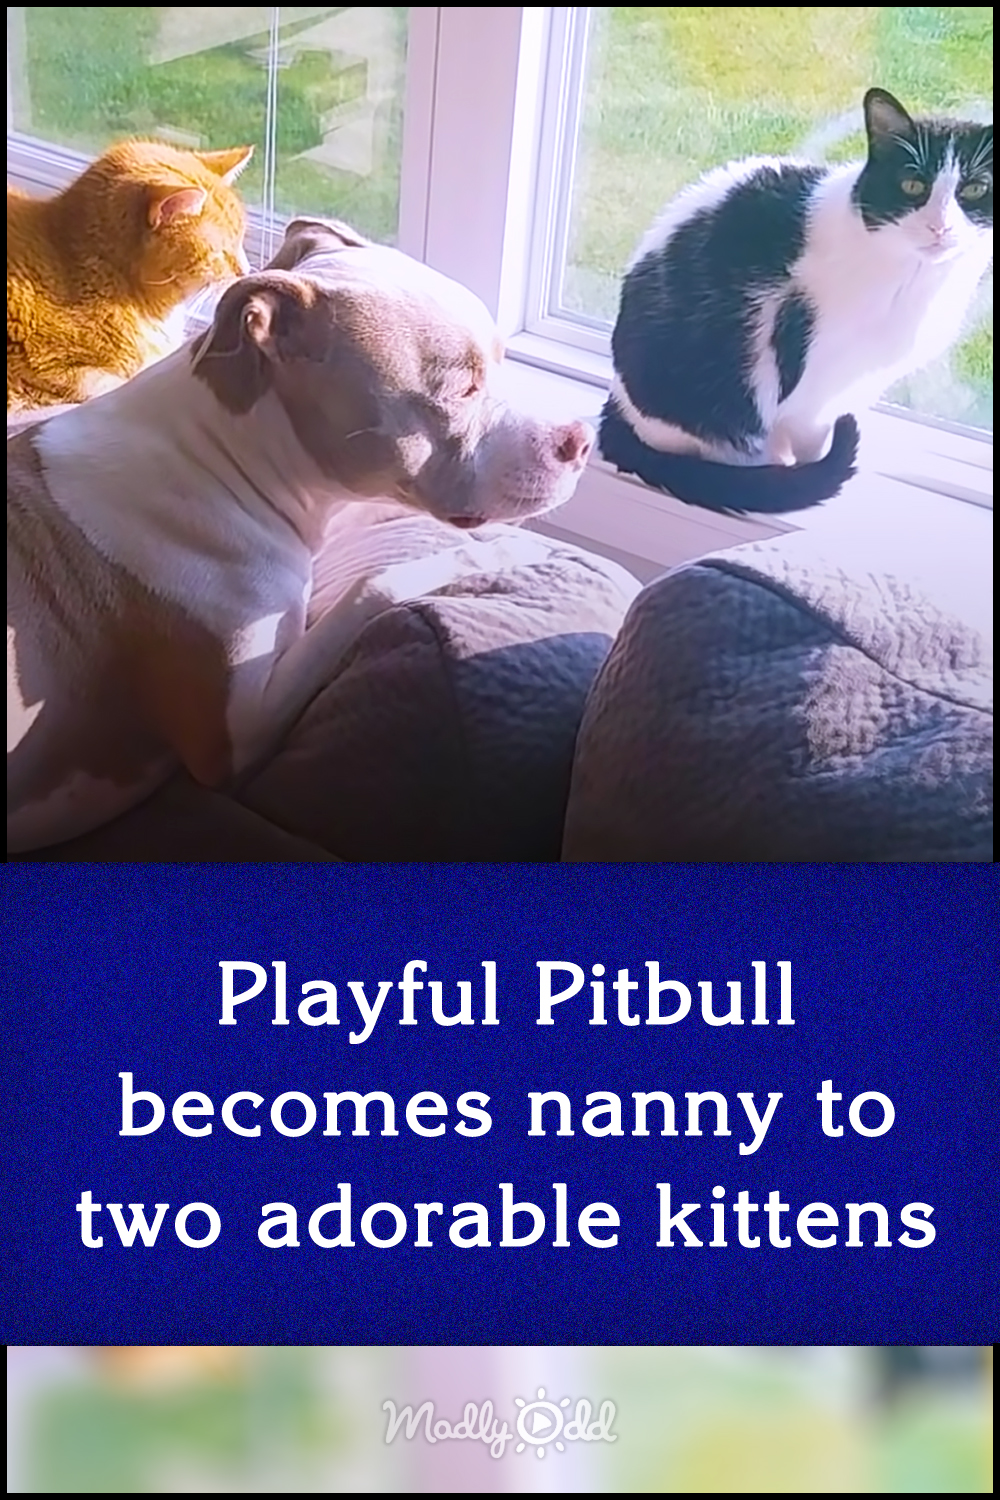 Playful Pitbull becomes nanny to two adorable kittens